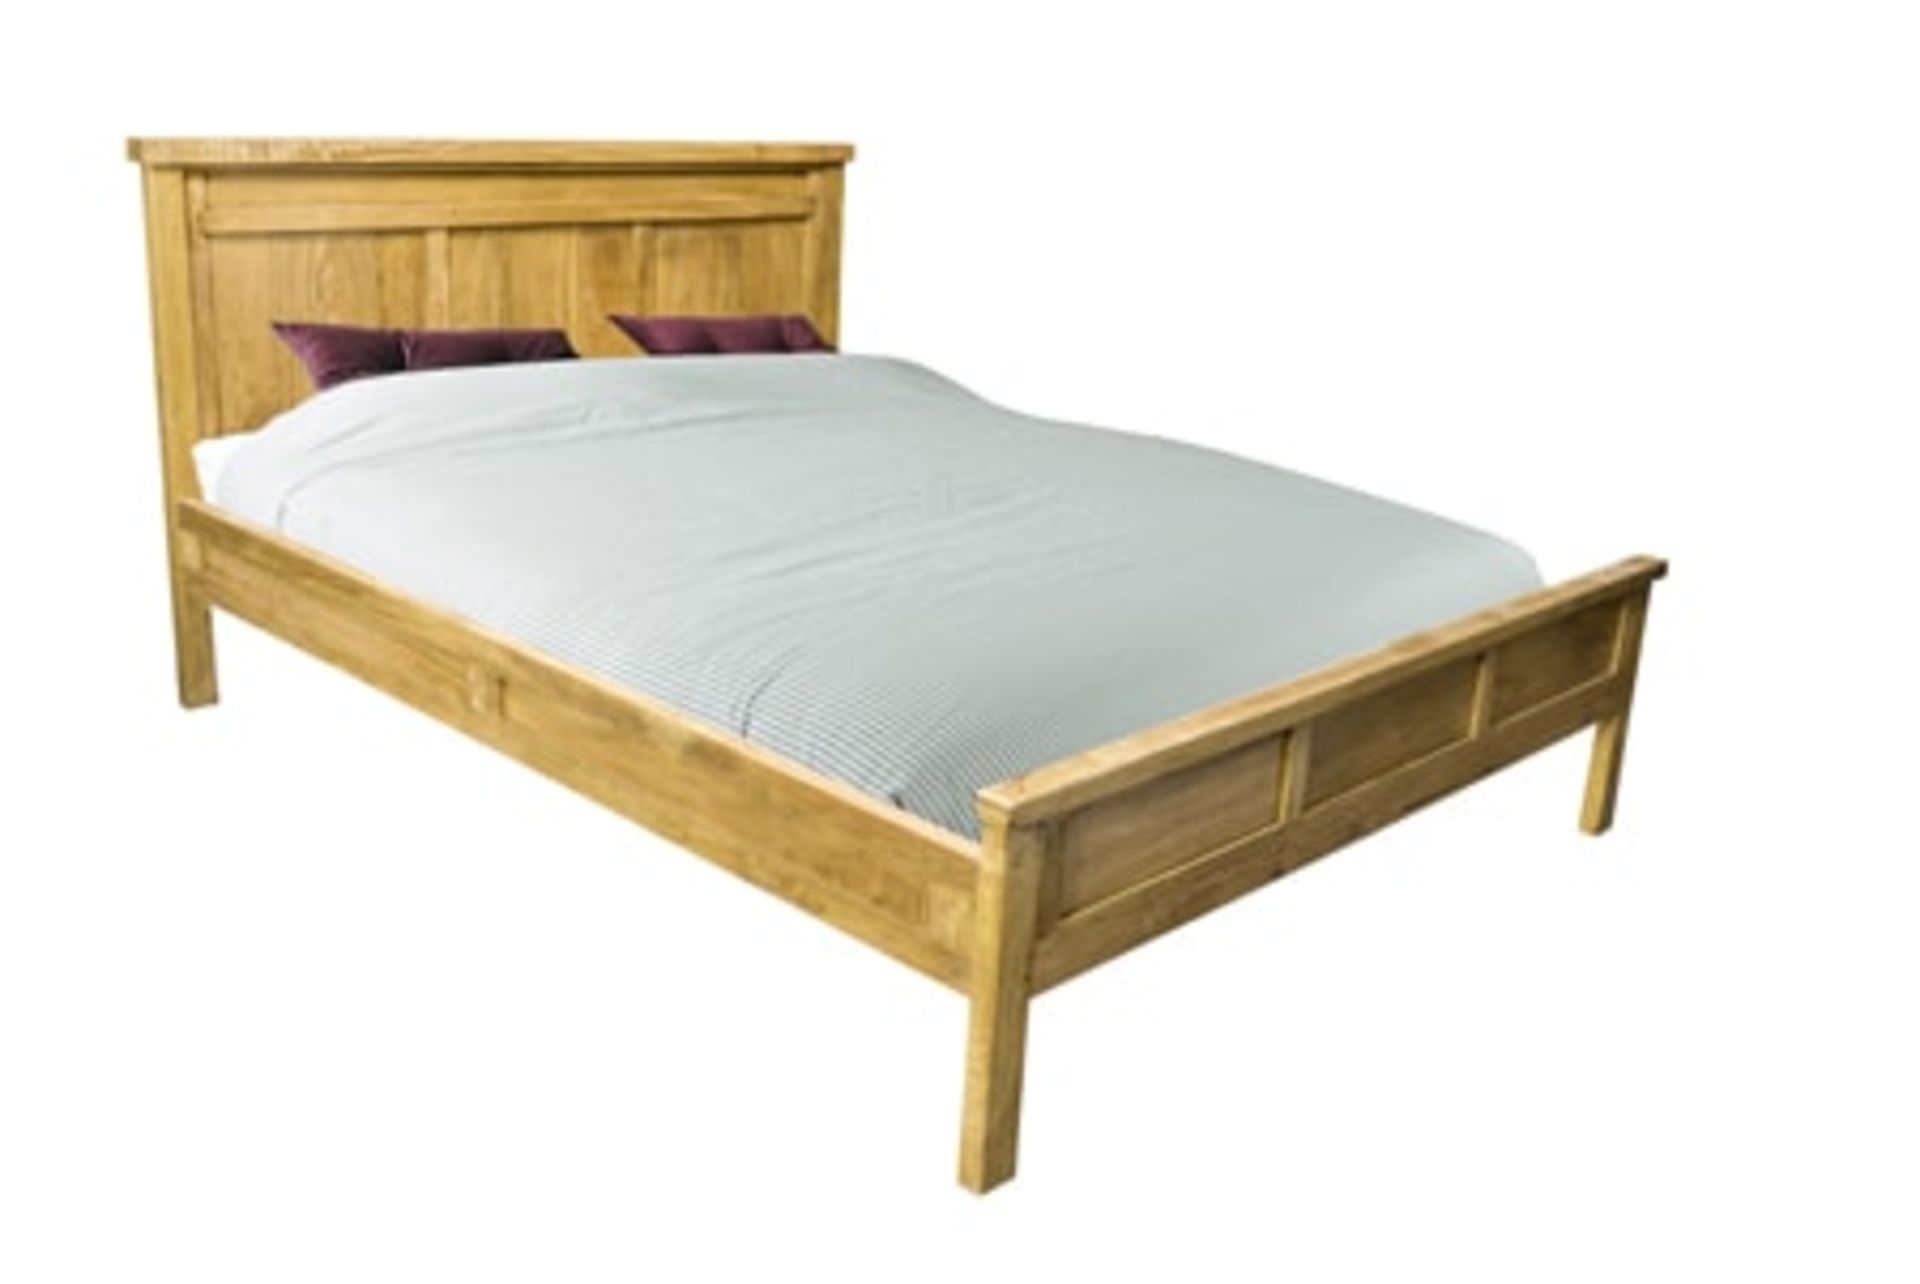 Soho Solid Wood 4FT 6" Double Bed Frame